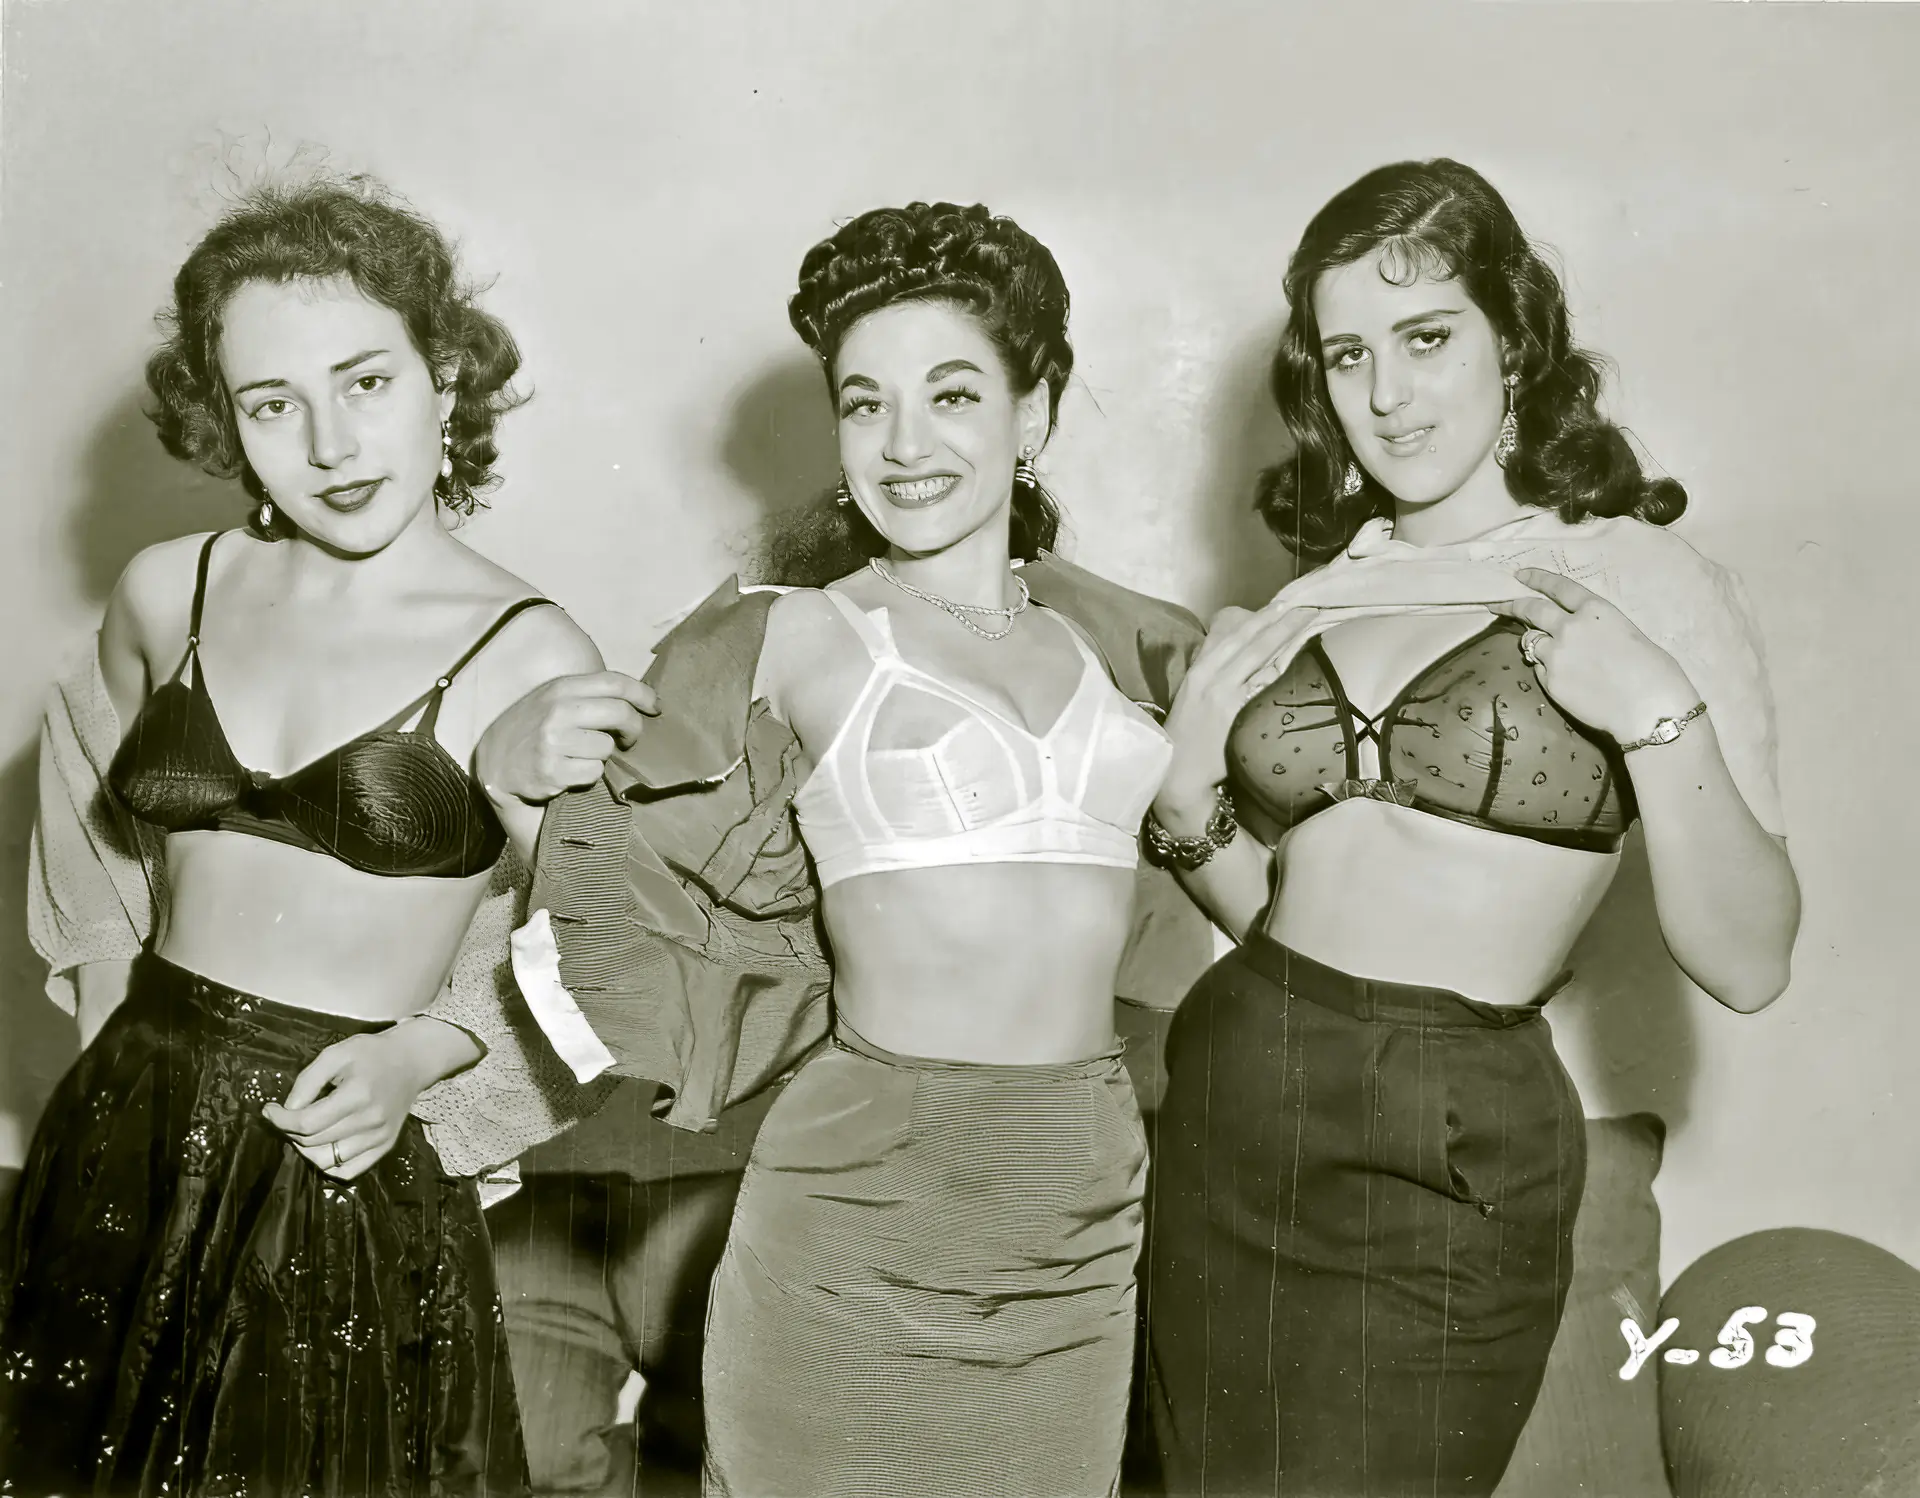 Barbara Pauline with 2 babes show their tits in bullet bras